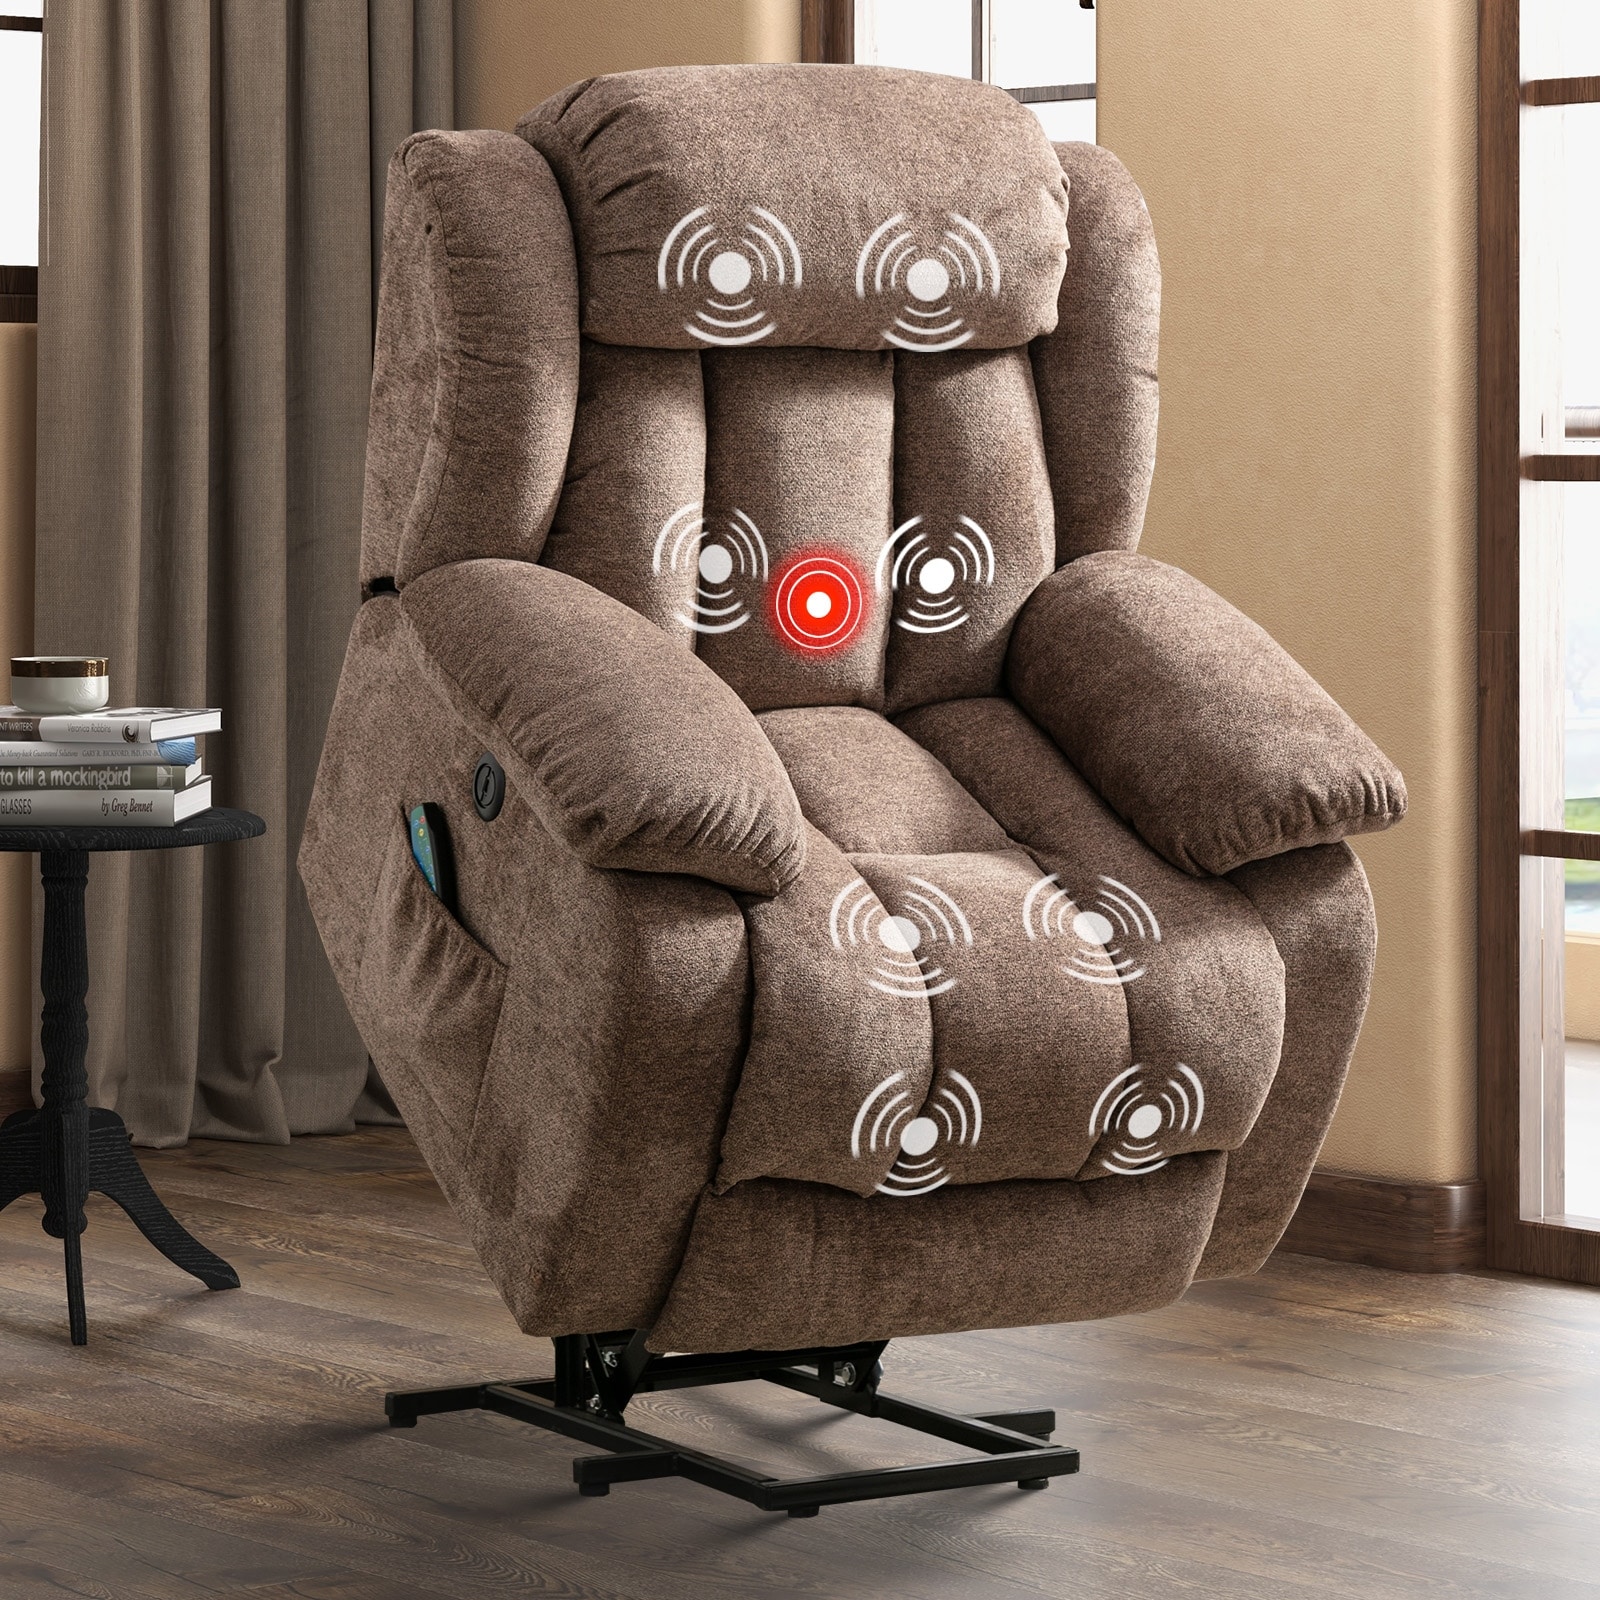 https://ak1.ostkcdn.com/images/products/is/images/direct/ee4b59c60376b4d1afef37a80dc67490395d2489/Heavy-Duty-Large-Power-Lift-Recliner-with-Massage-and-Heating-for-Elderly.jpg